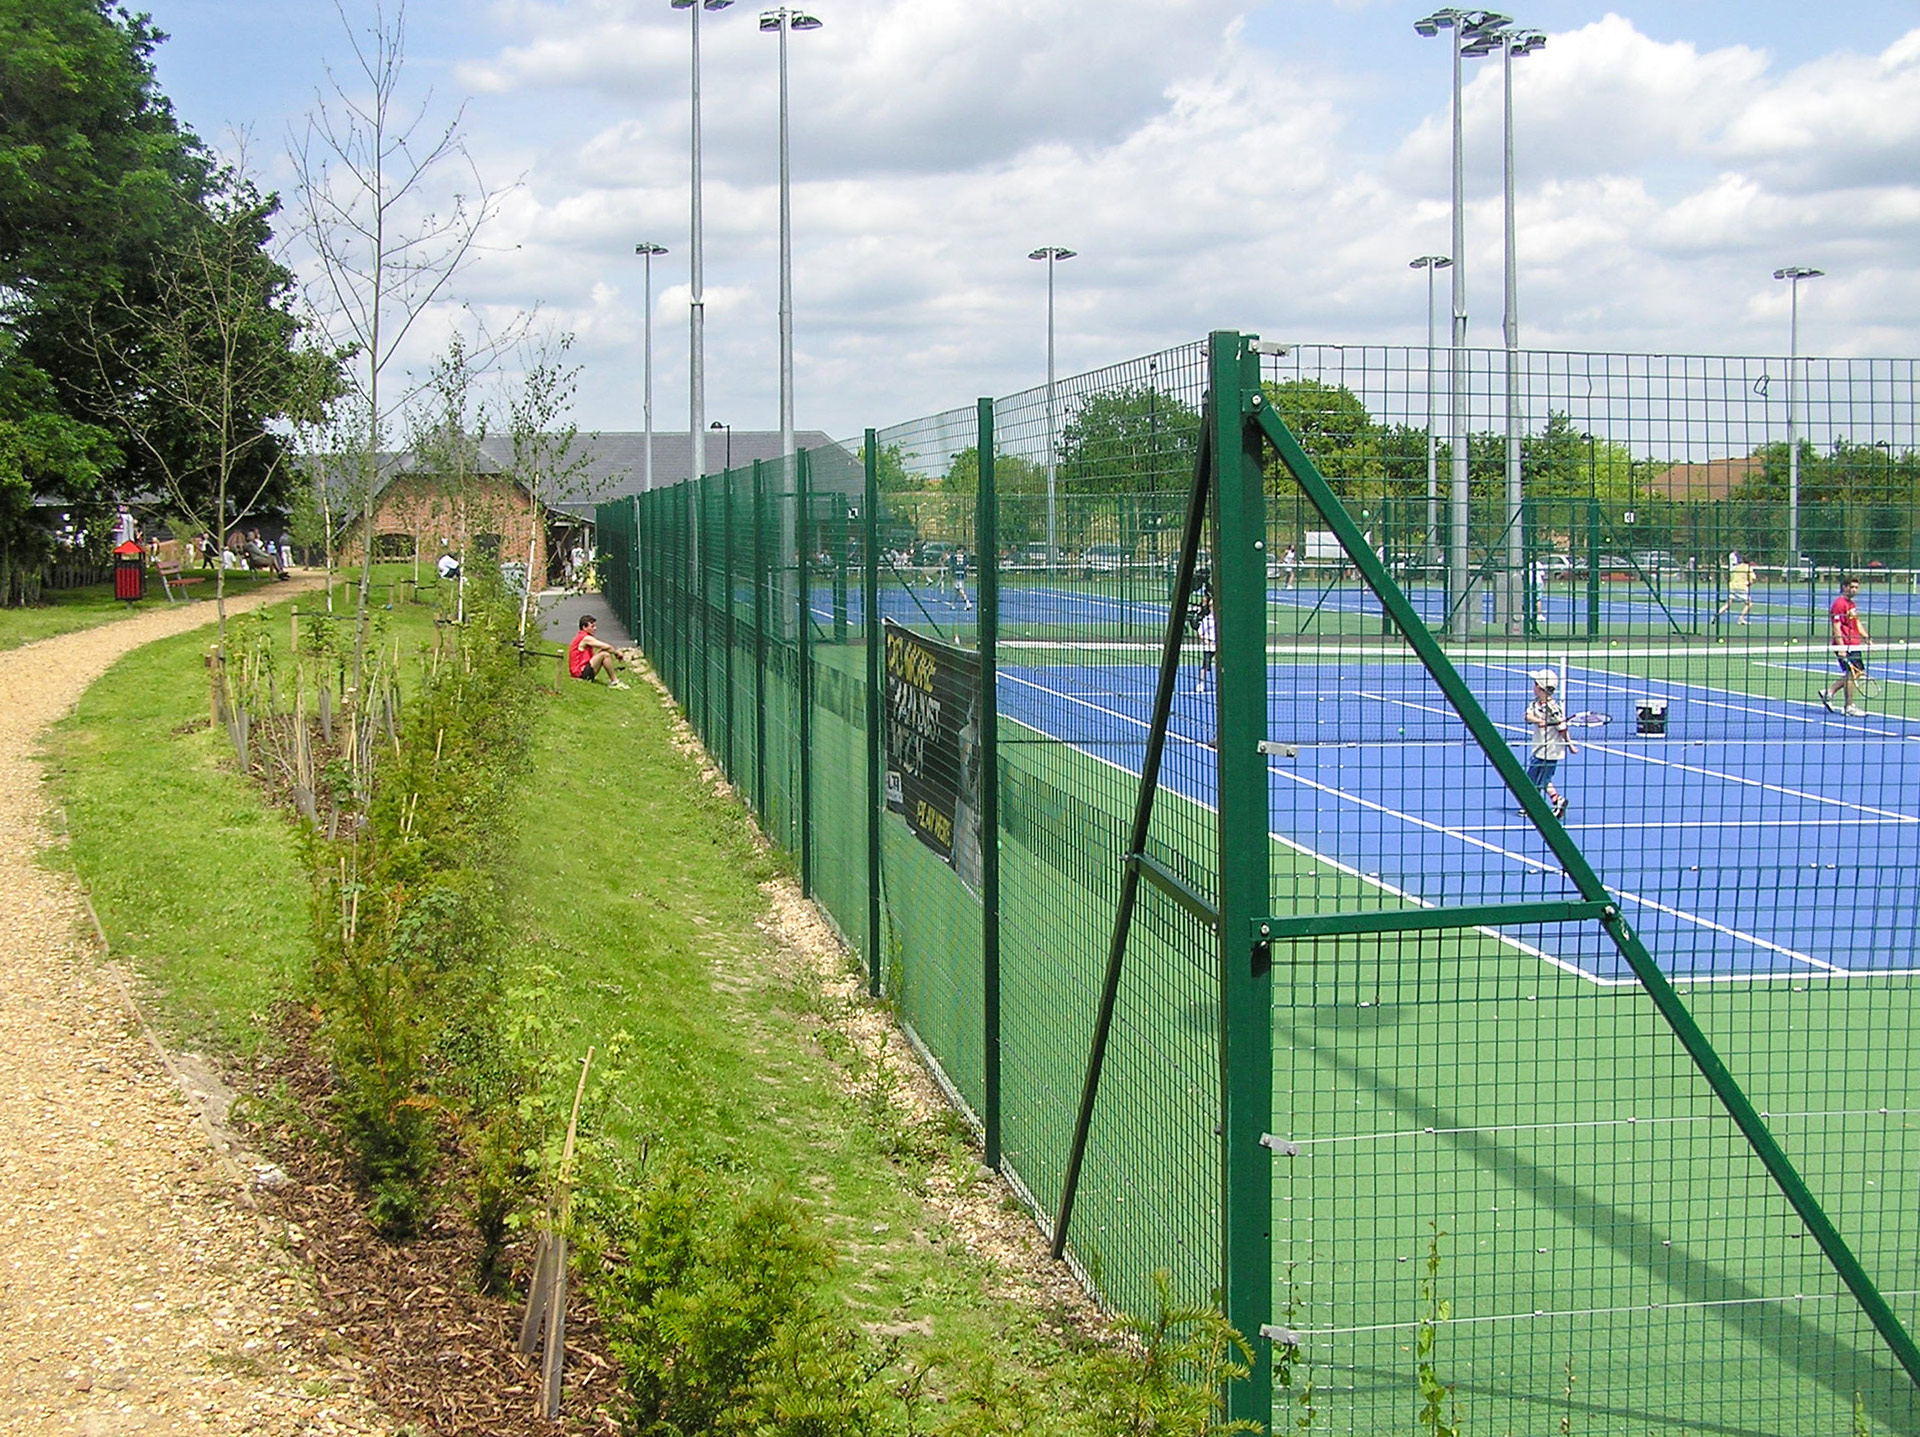 side view of fenced tennis courts from path